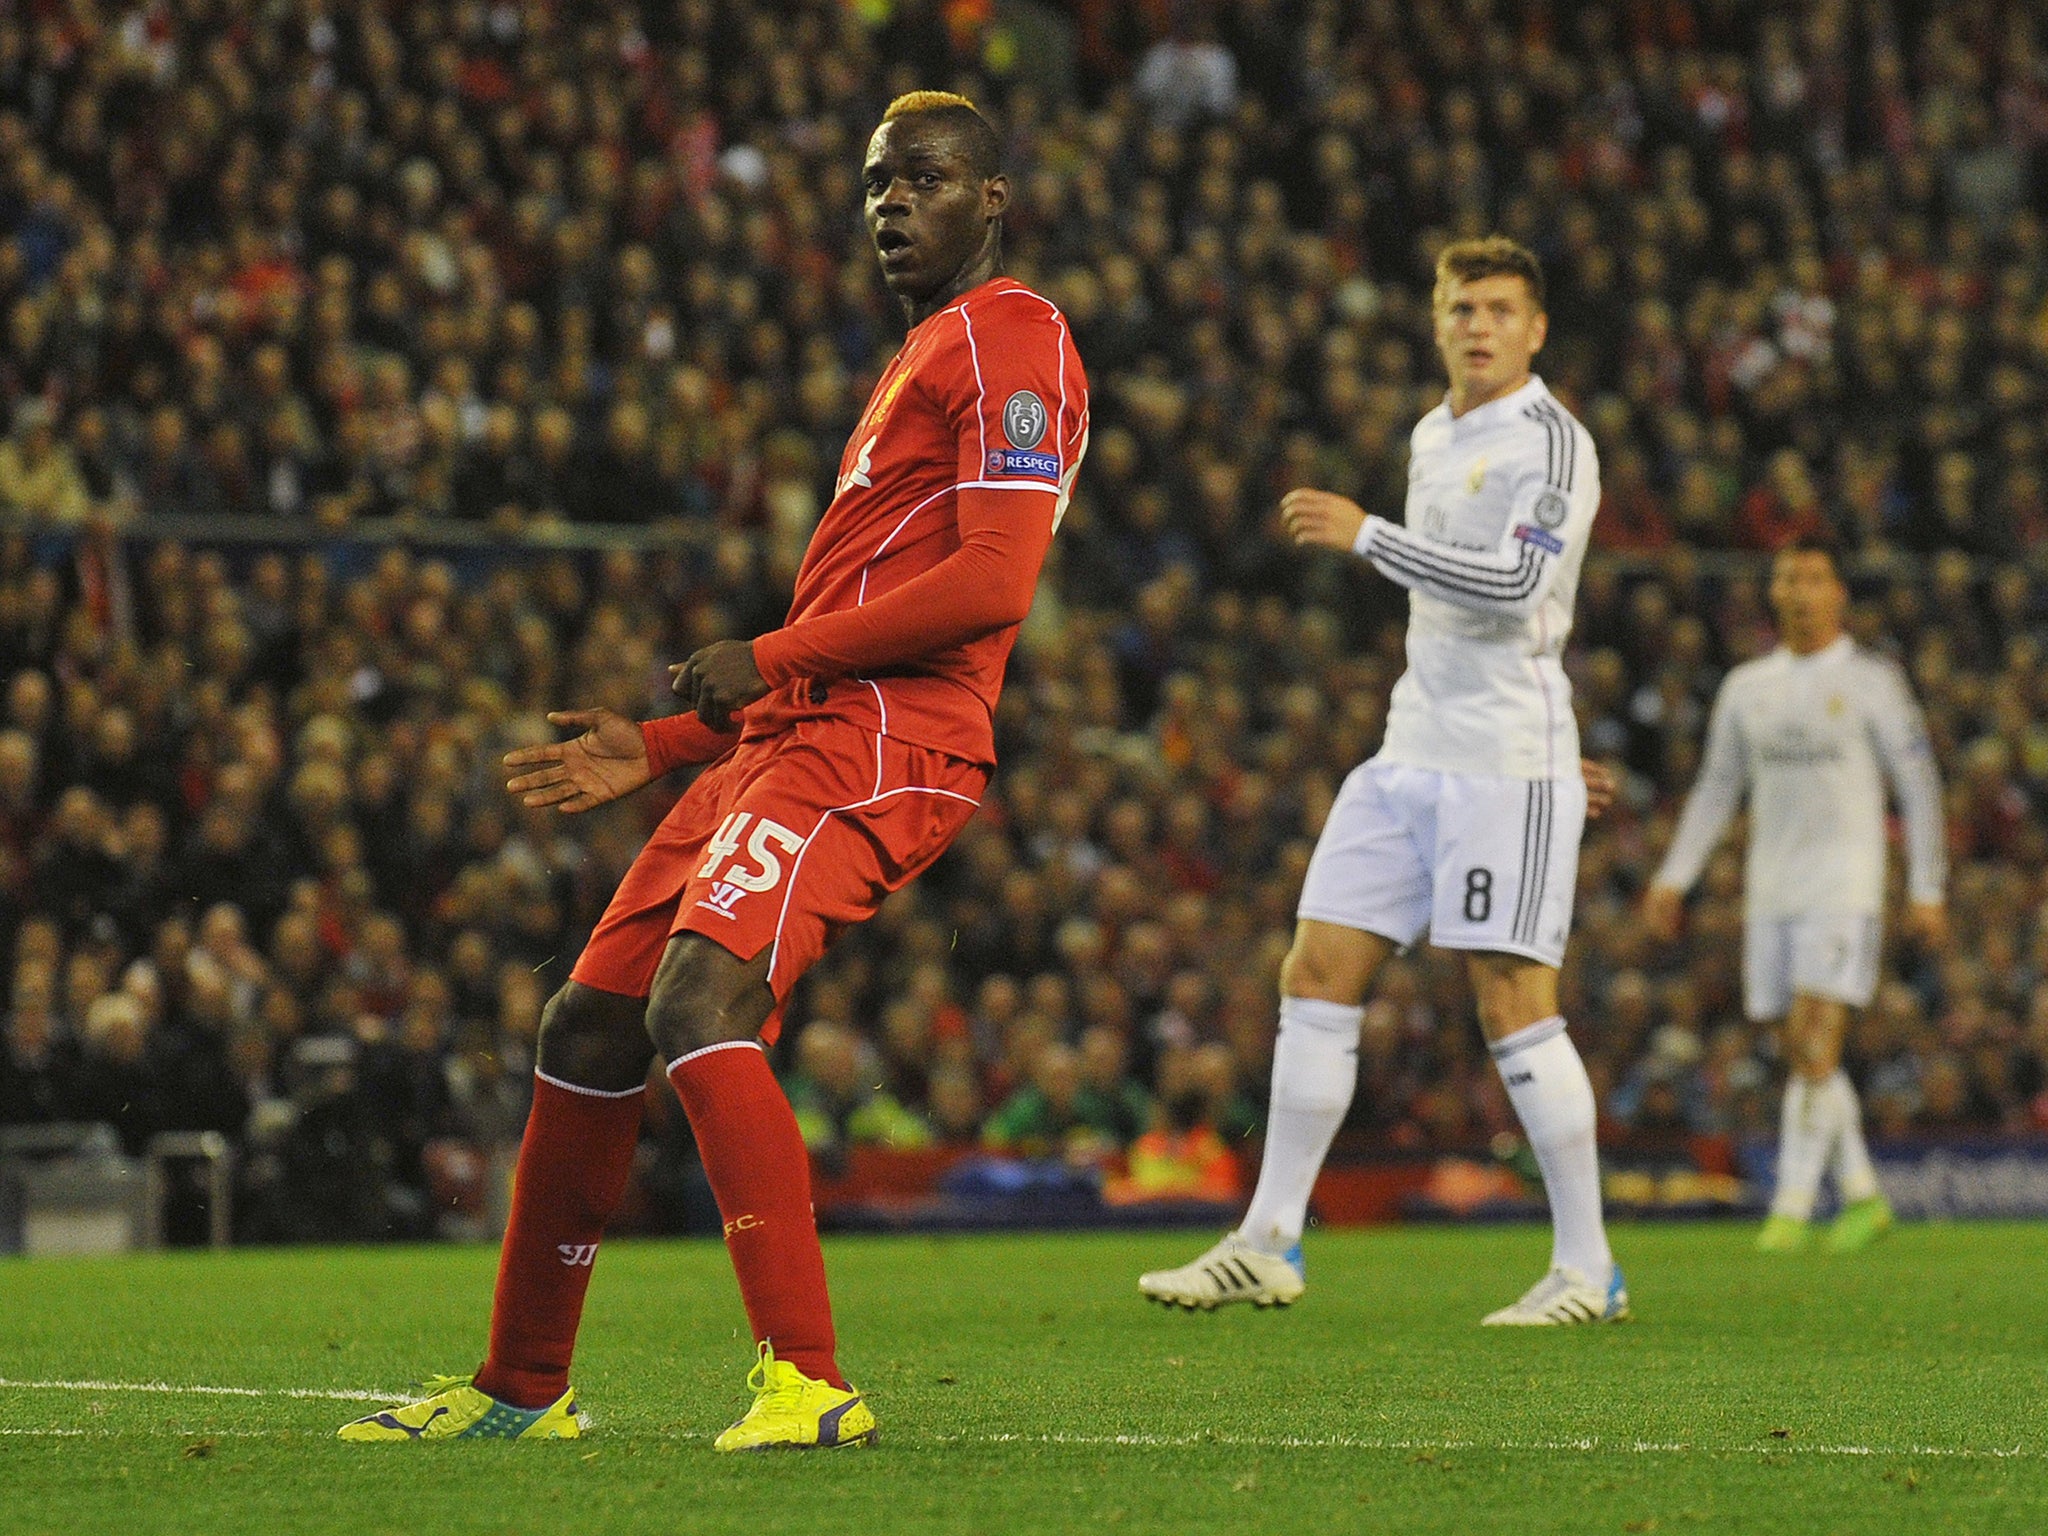 Mario Balotelli in action against Real Madrid